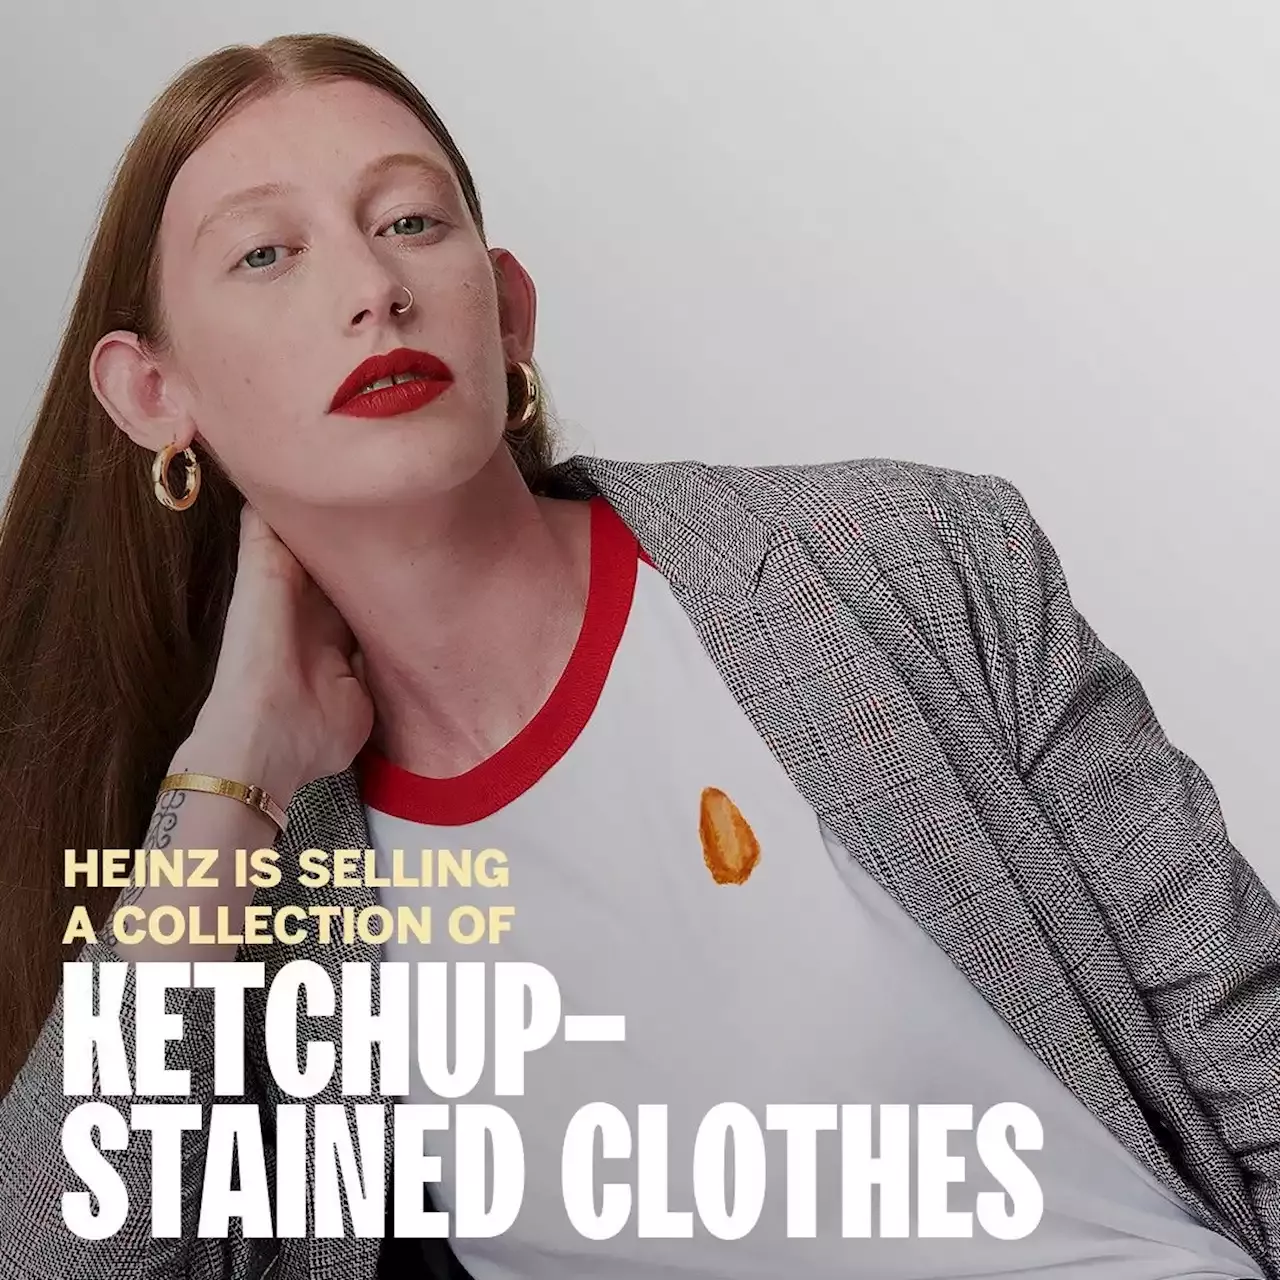 Heinz and ThredUp are selling ketchup-stained secondhand clothes